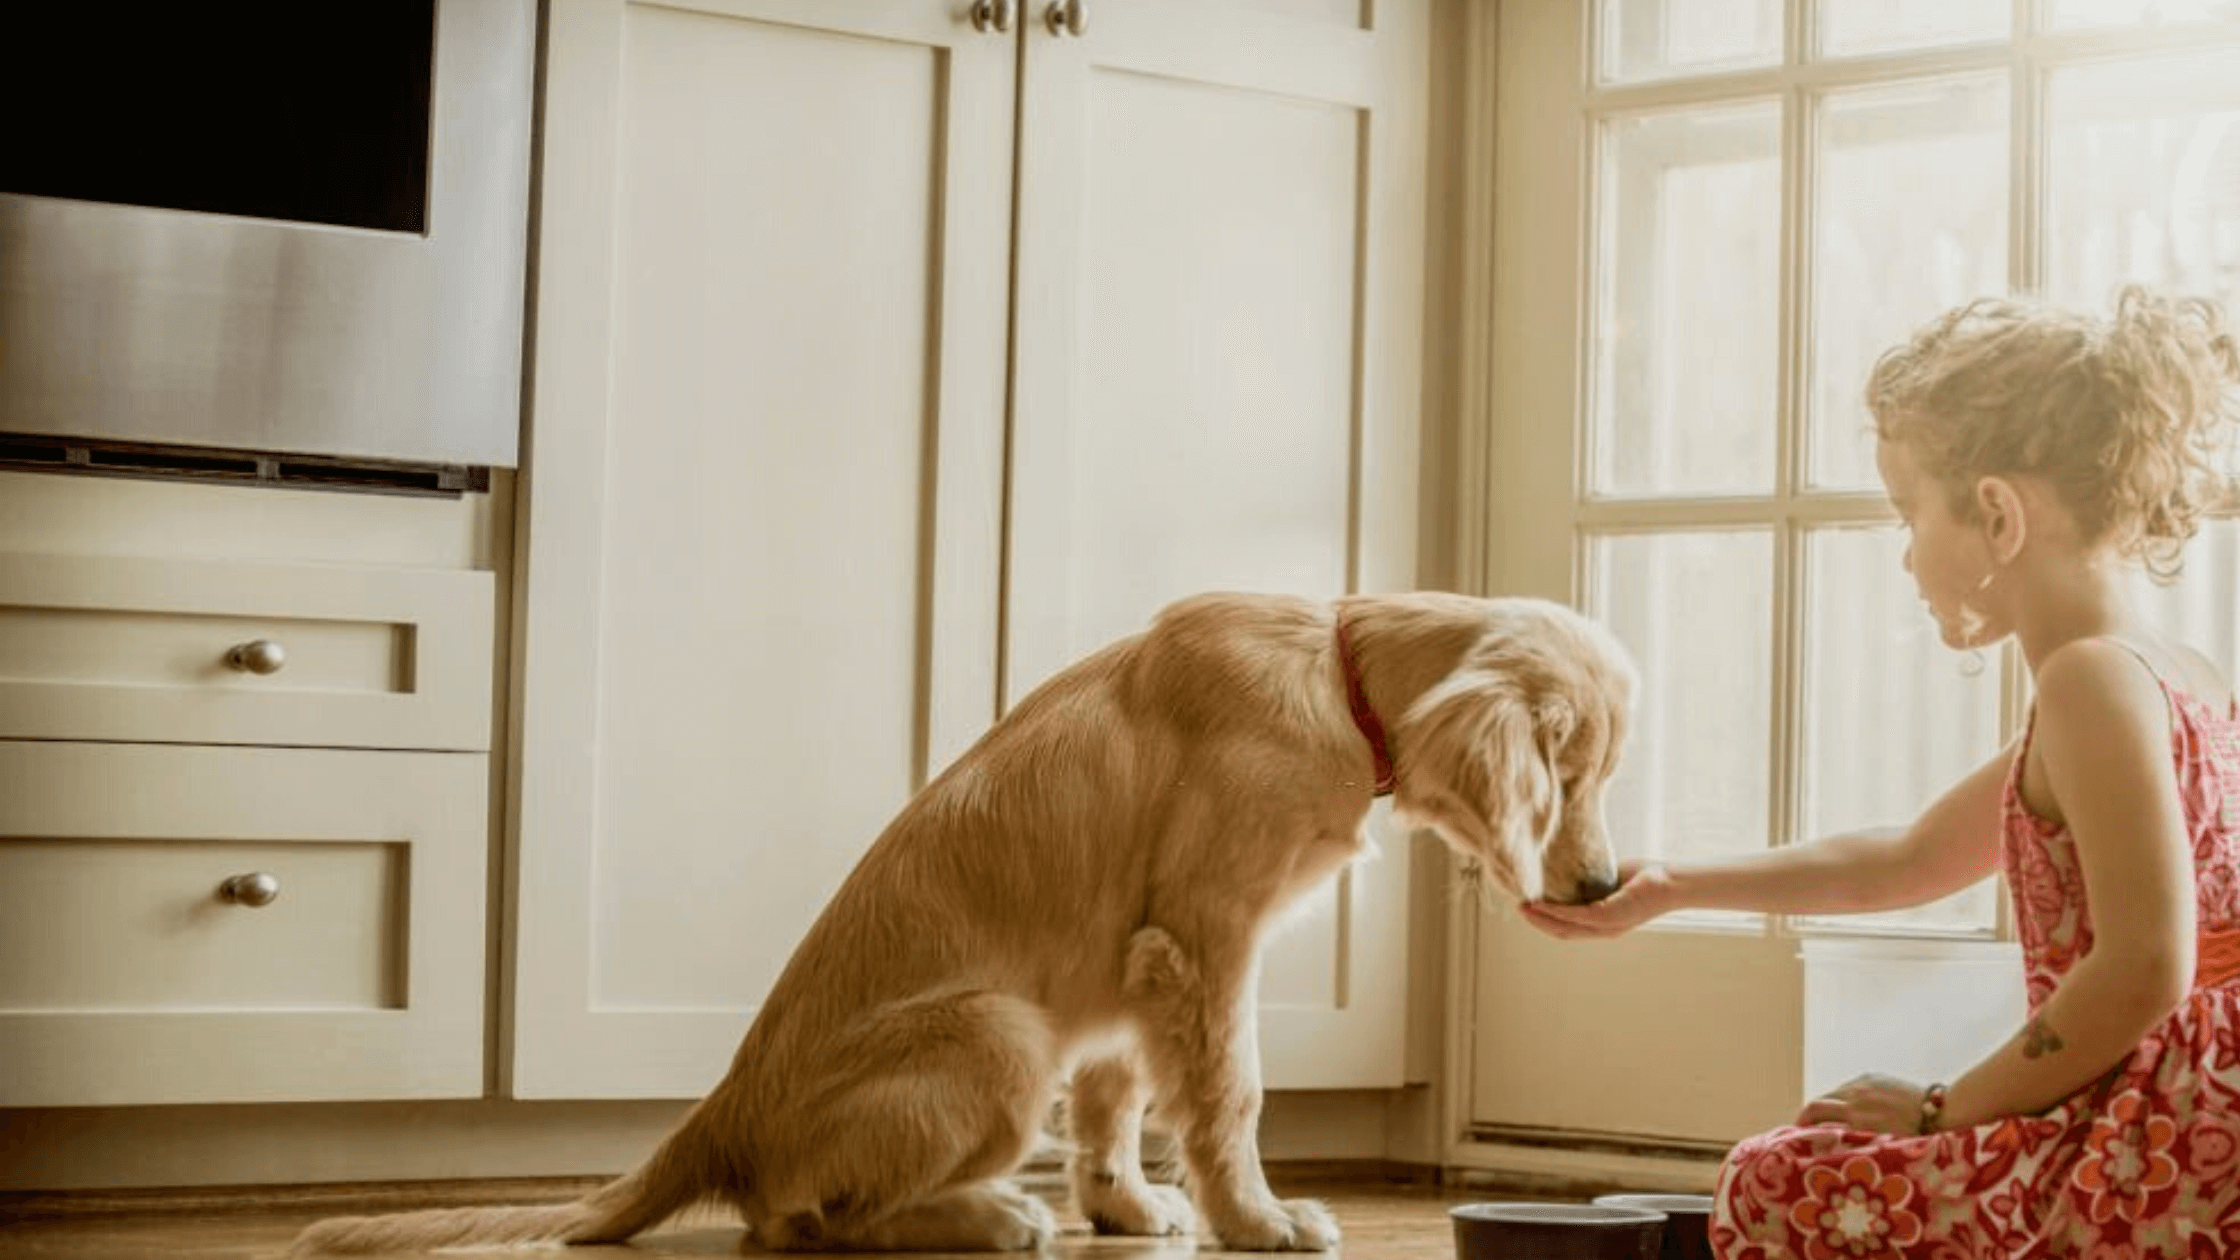 Certain Foods To Pet Dogs May Cause Spreading Antibiotic-Resistant Superbugs